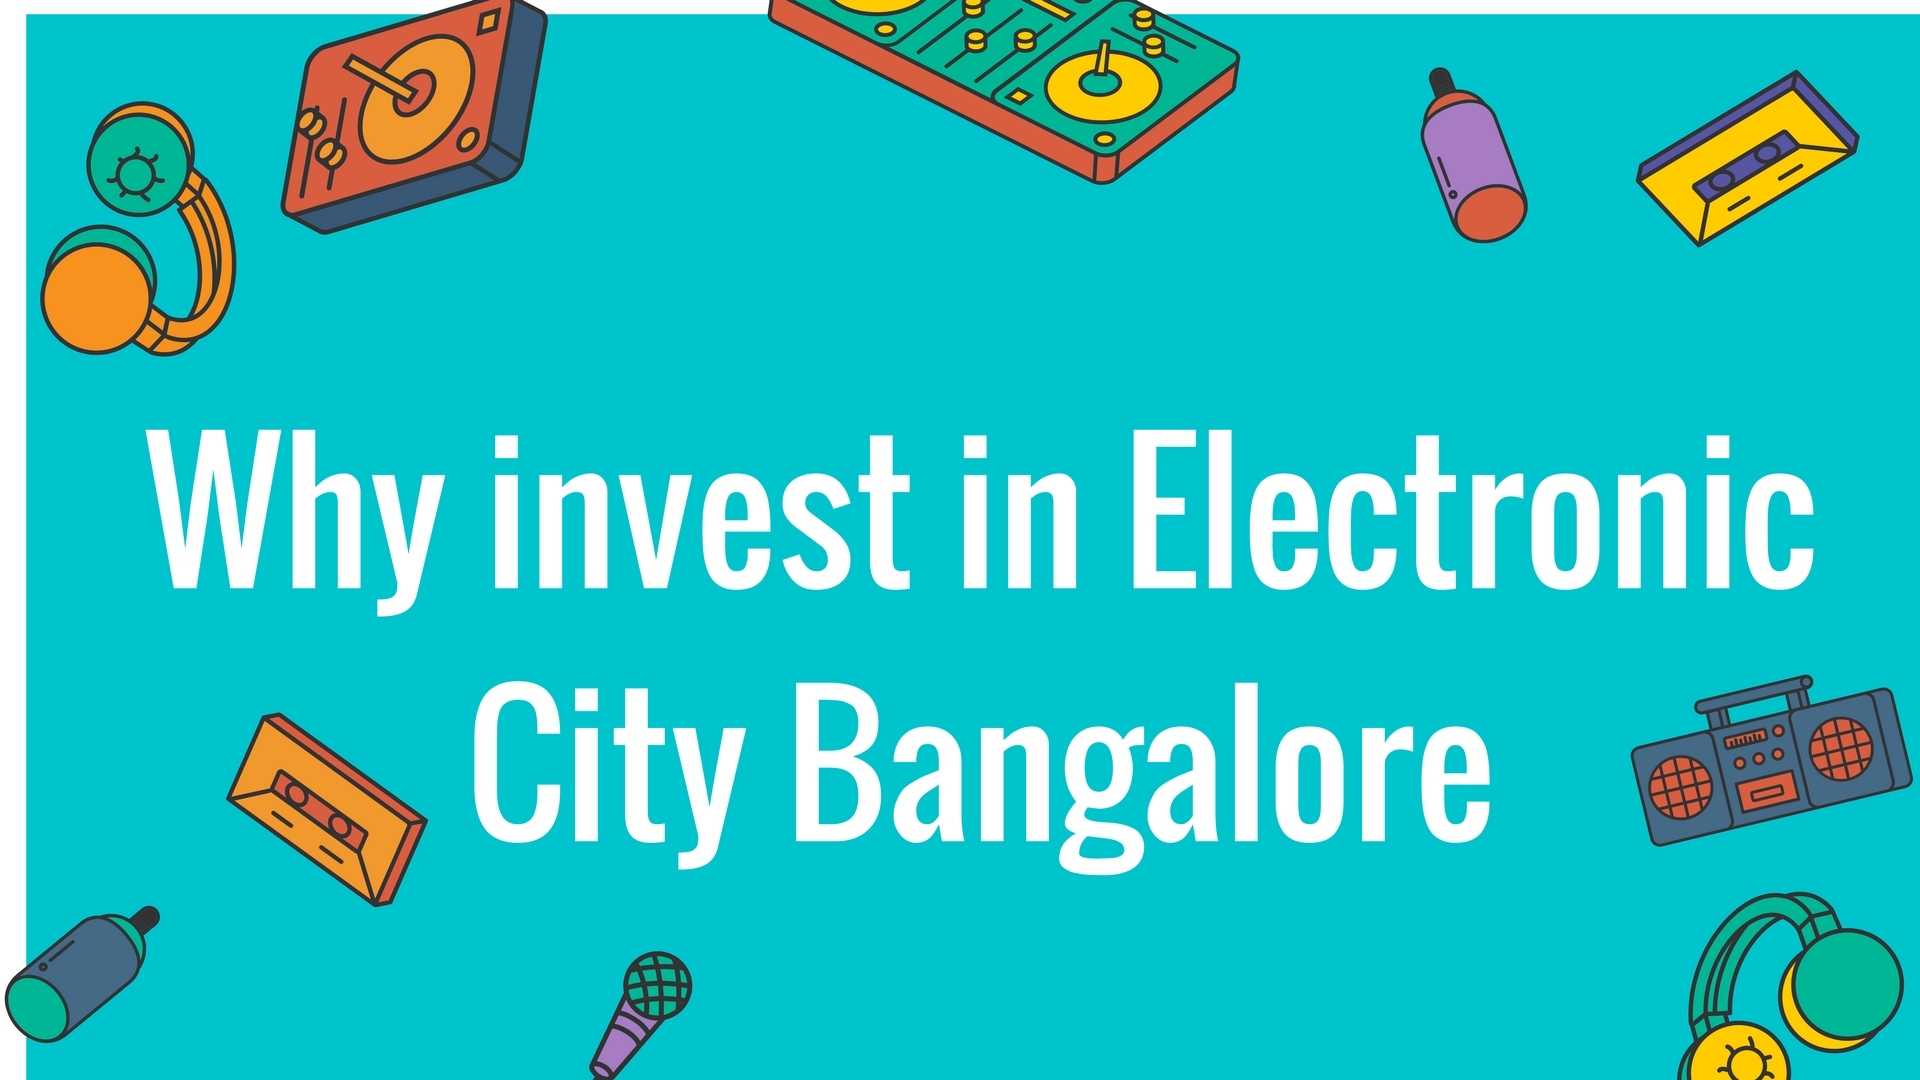 Plenty of reasons to invest in Electronic City & what is your reason